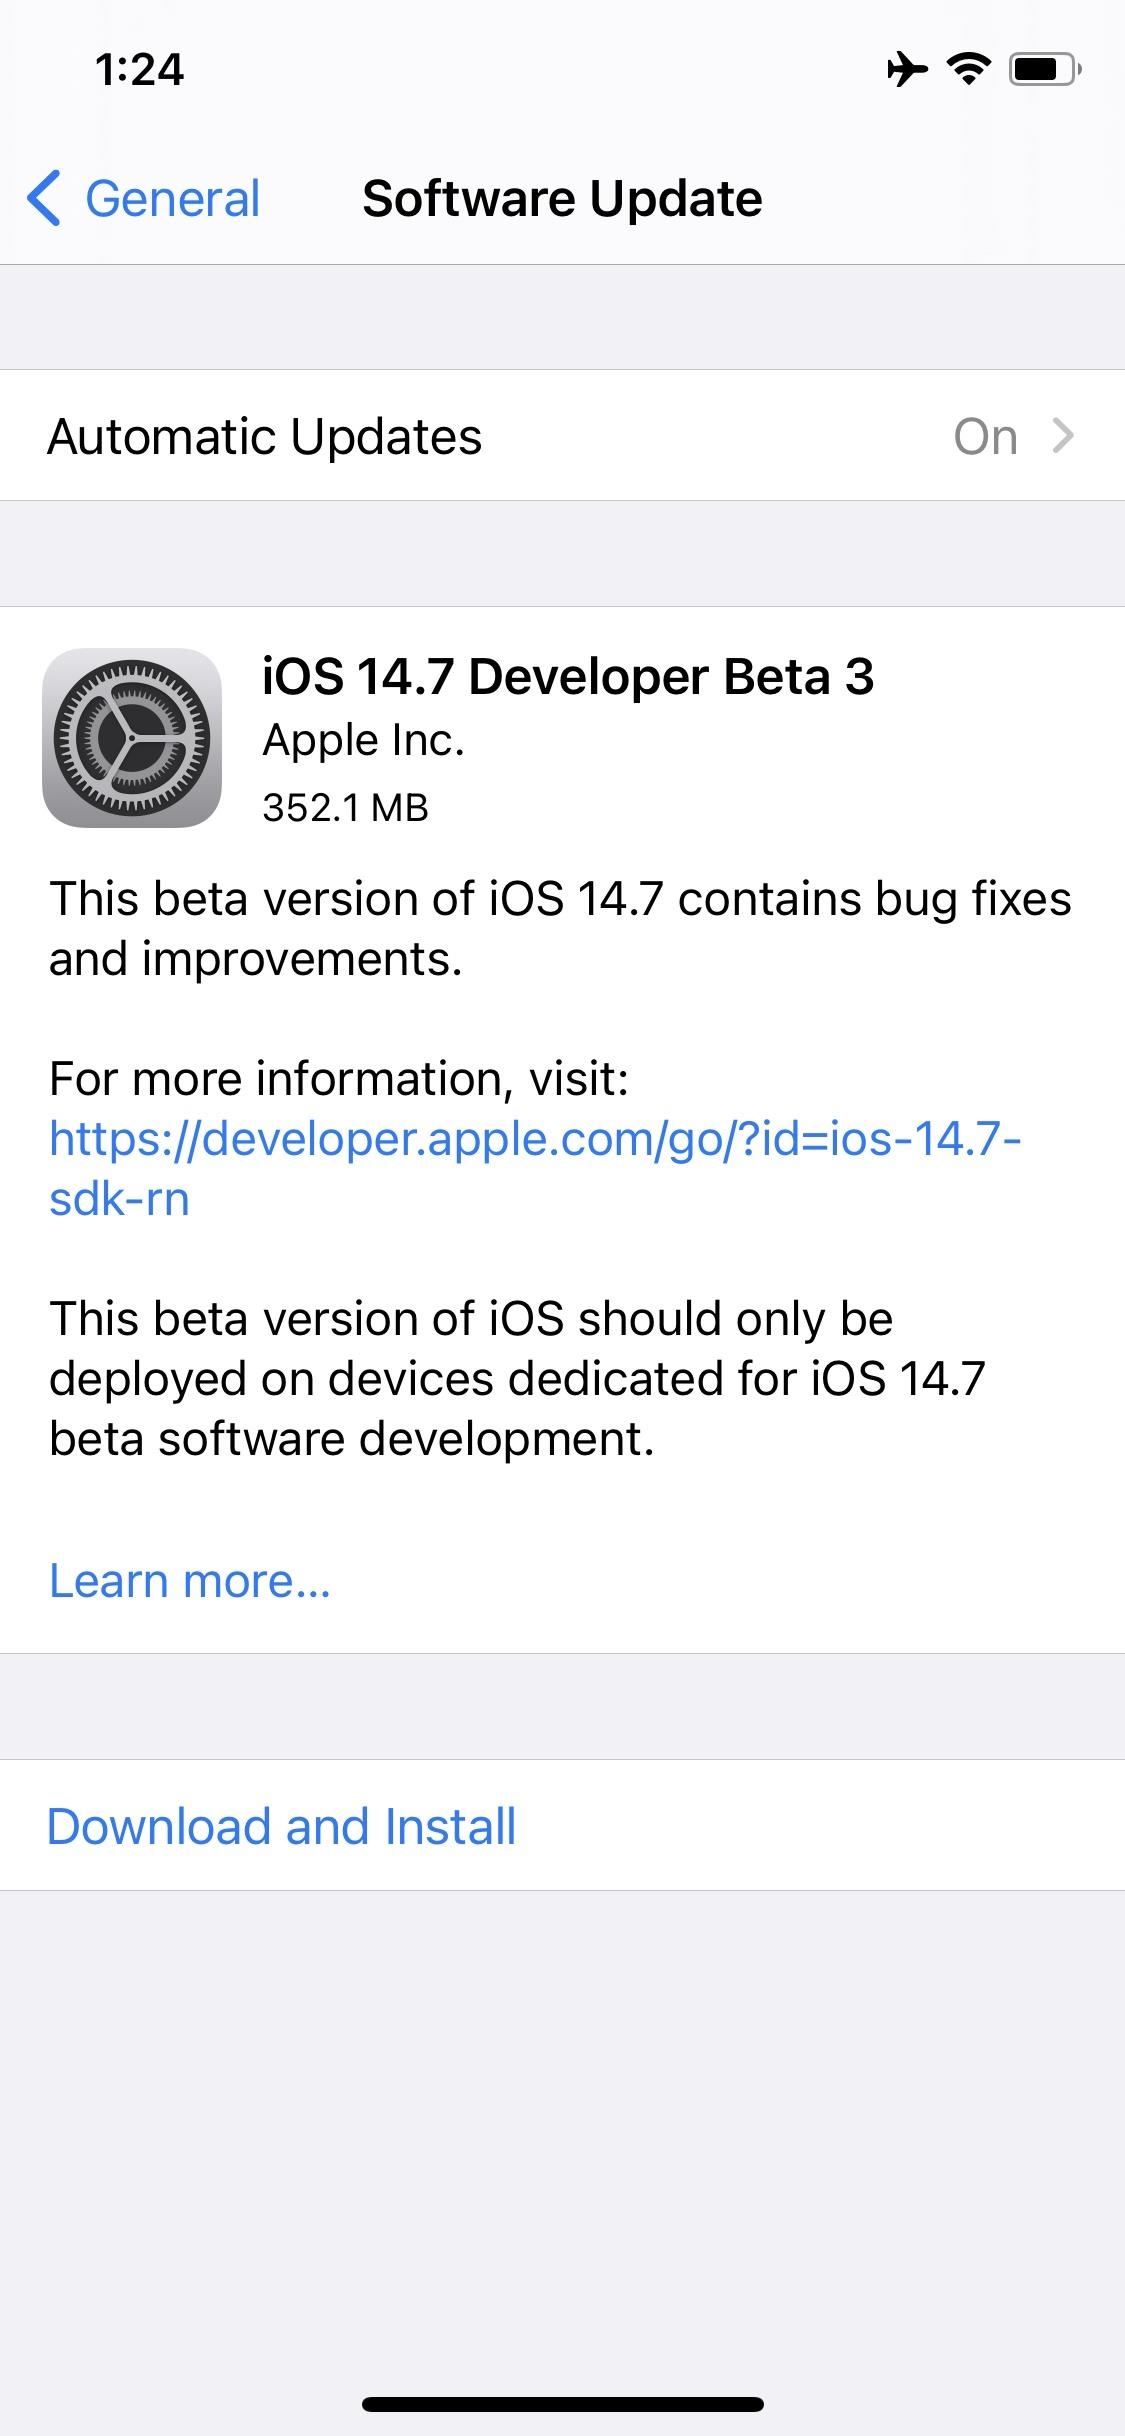 Apple Releases iOS 14.7 Beta 3 for iPhone